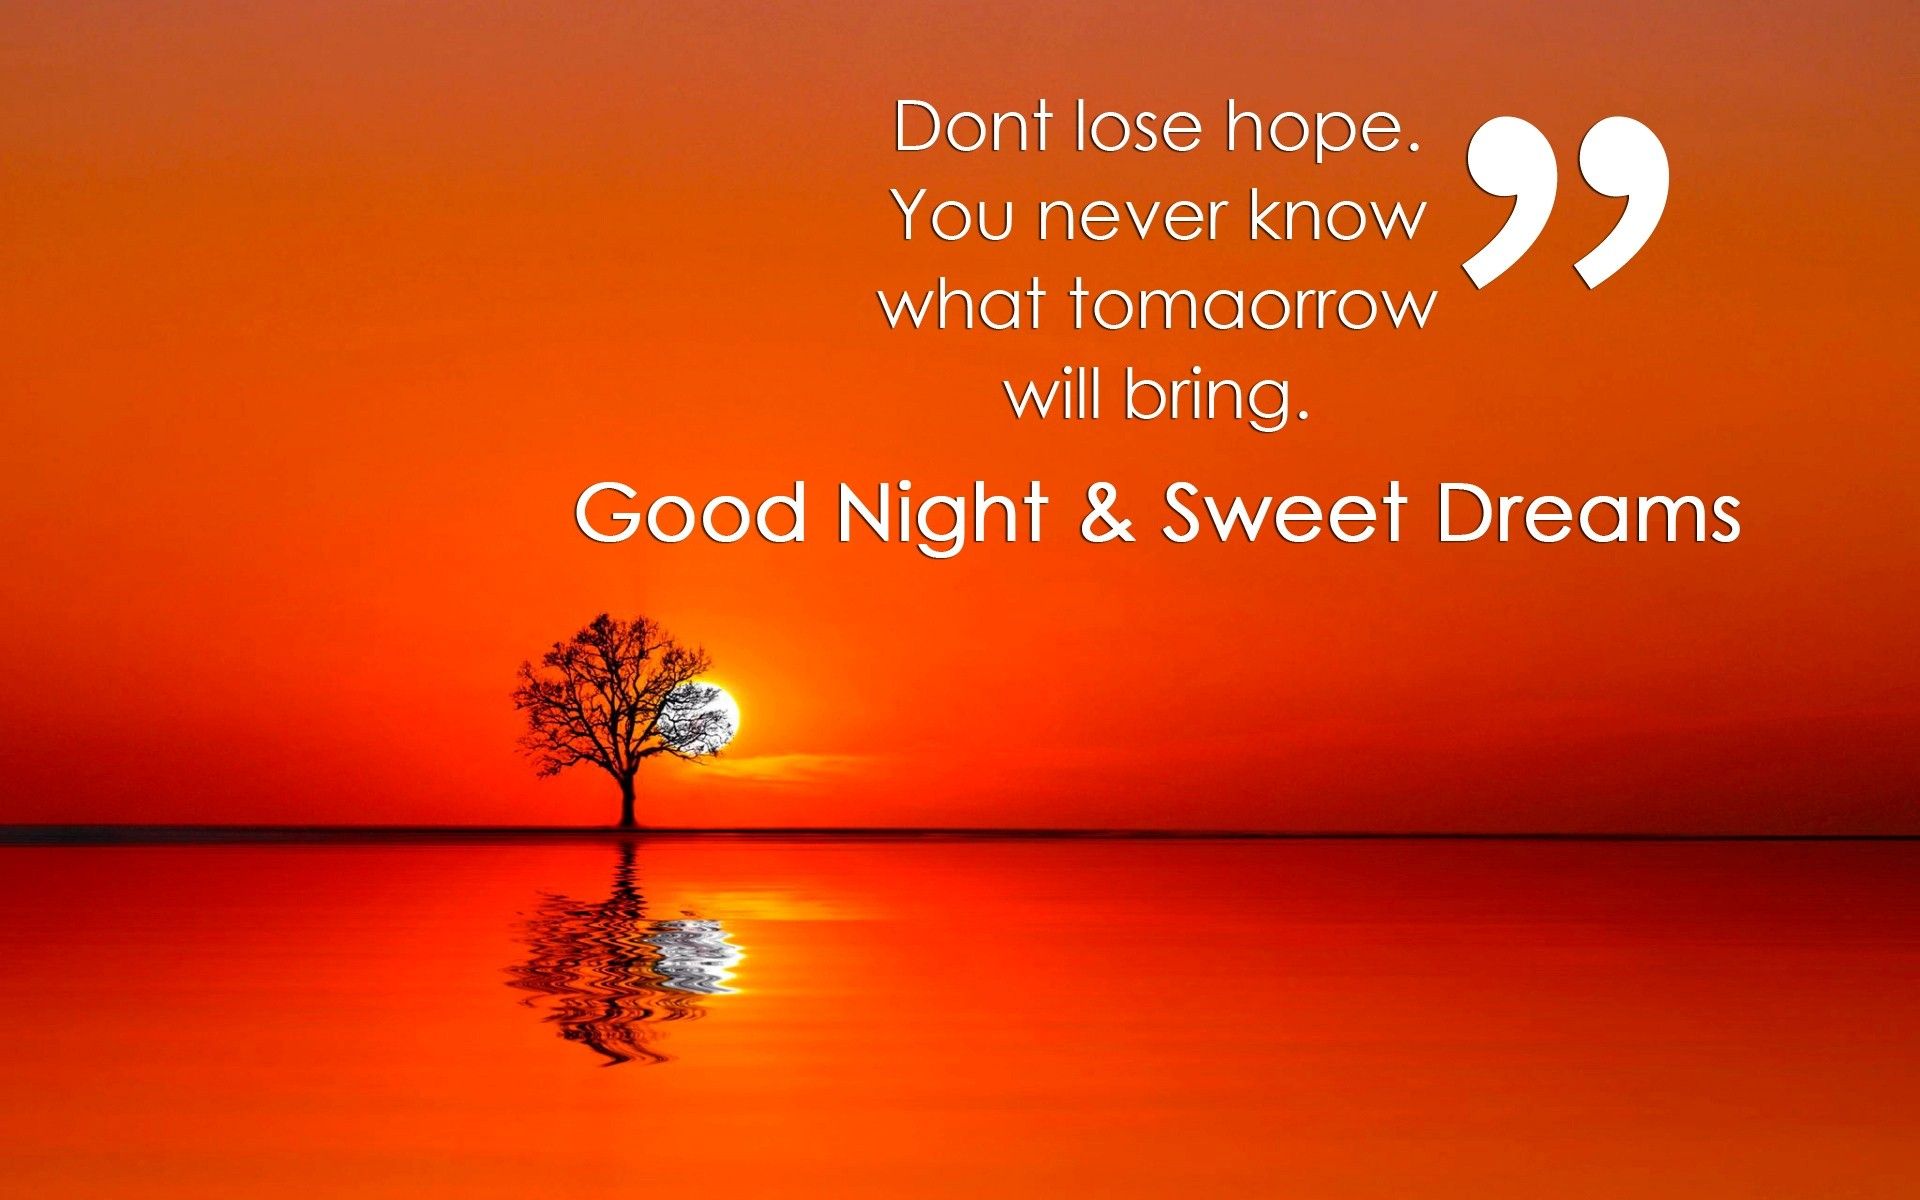 free download good night images with quotes